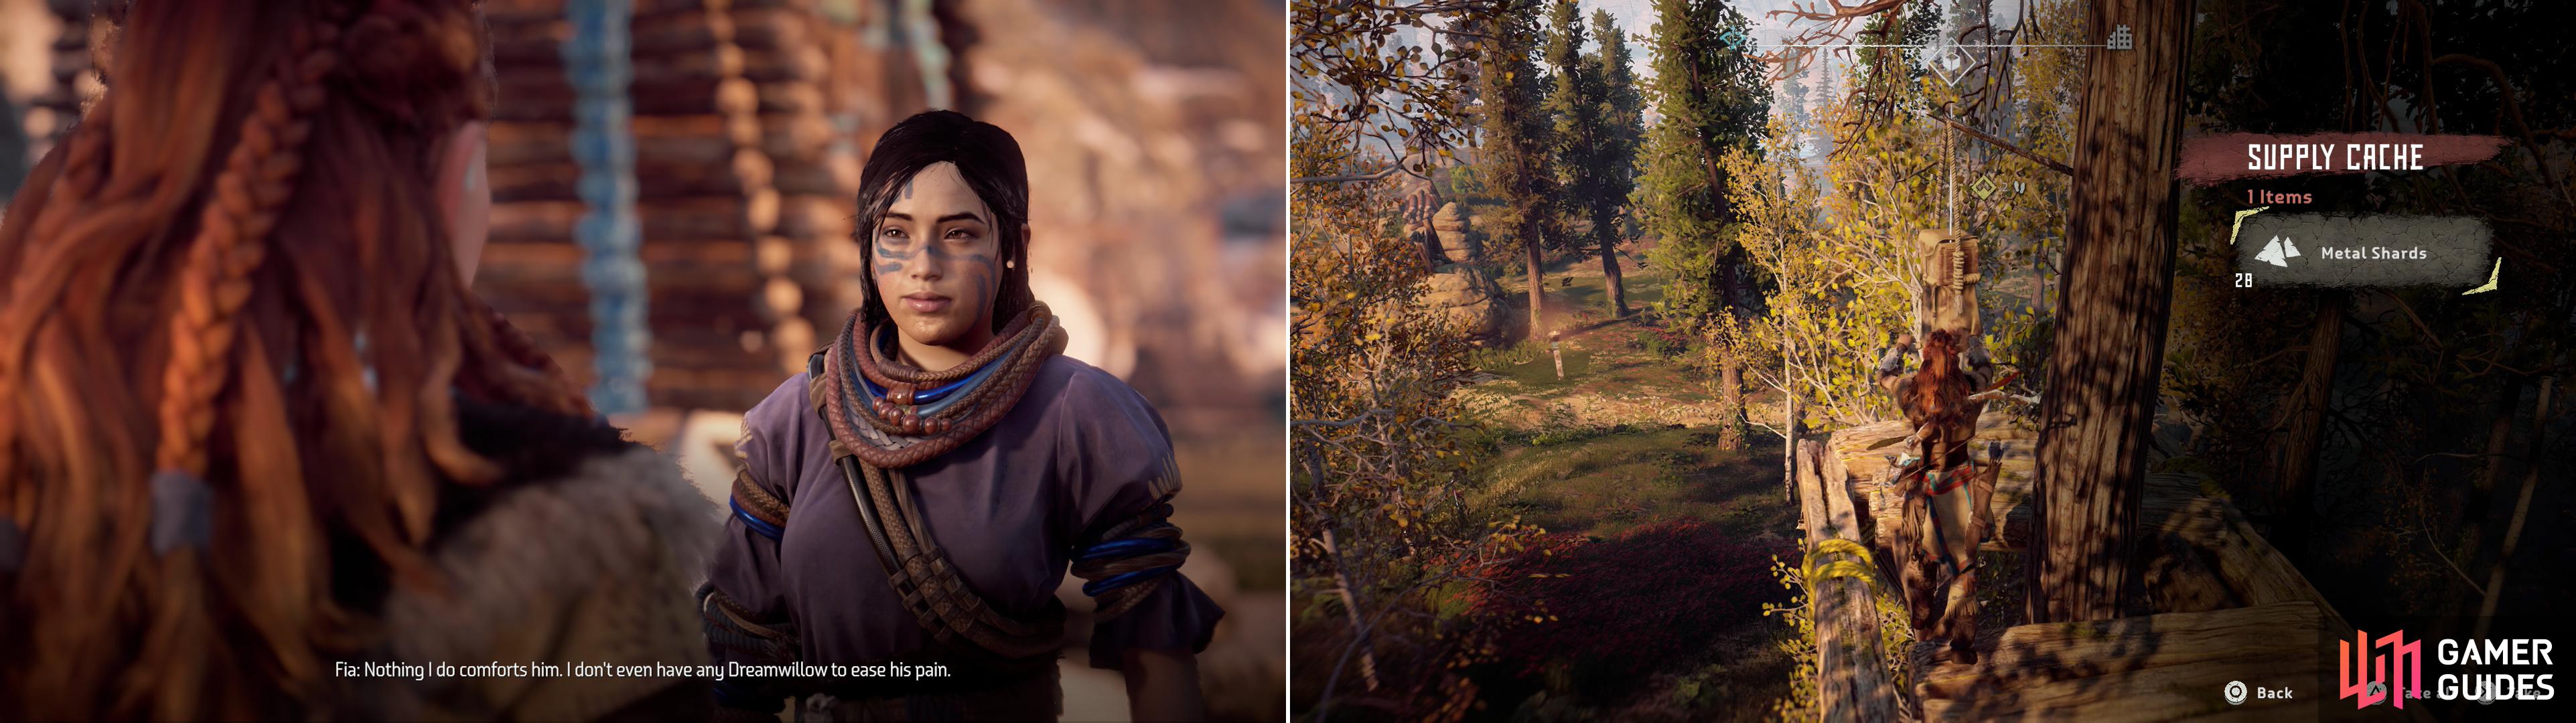 Talk to Fia to learn that she’s short a critical herb, and that wounded braves are suffering because of it (left). Search two Supply Caches in the wilderness to find that stockpiles of the herb are surprisingly missing (right).